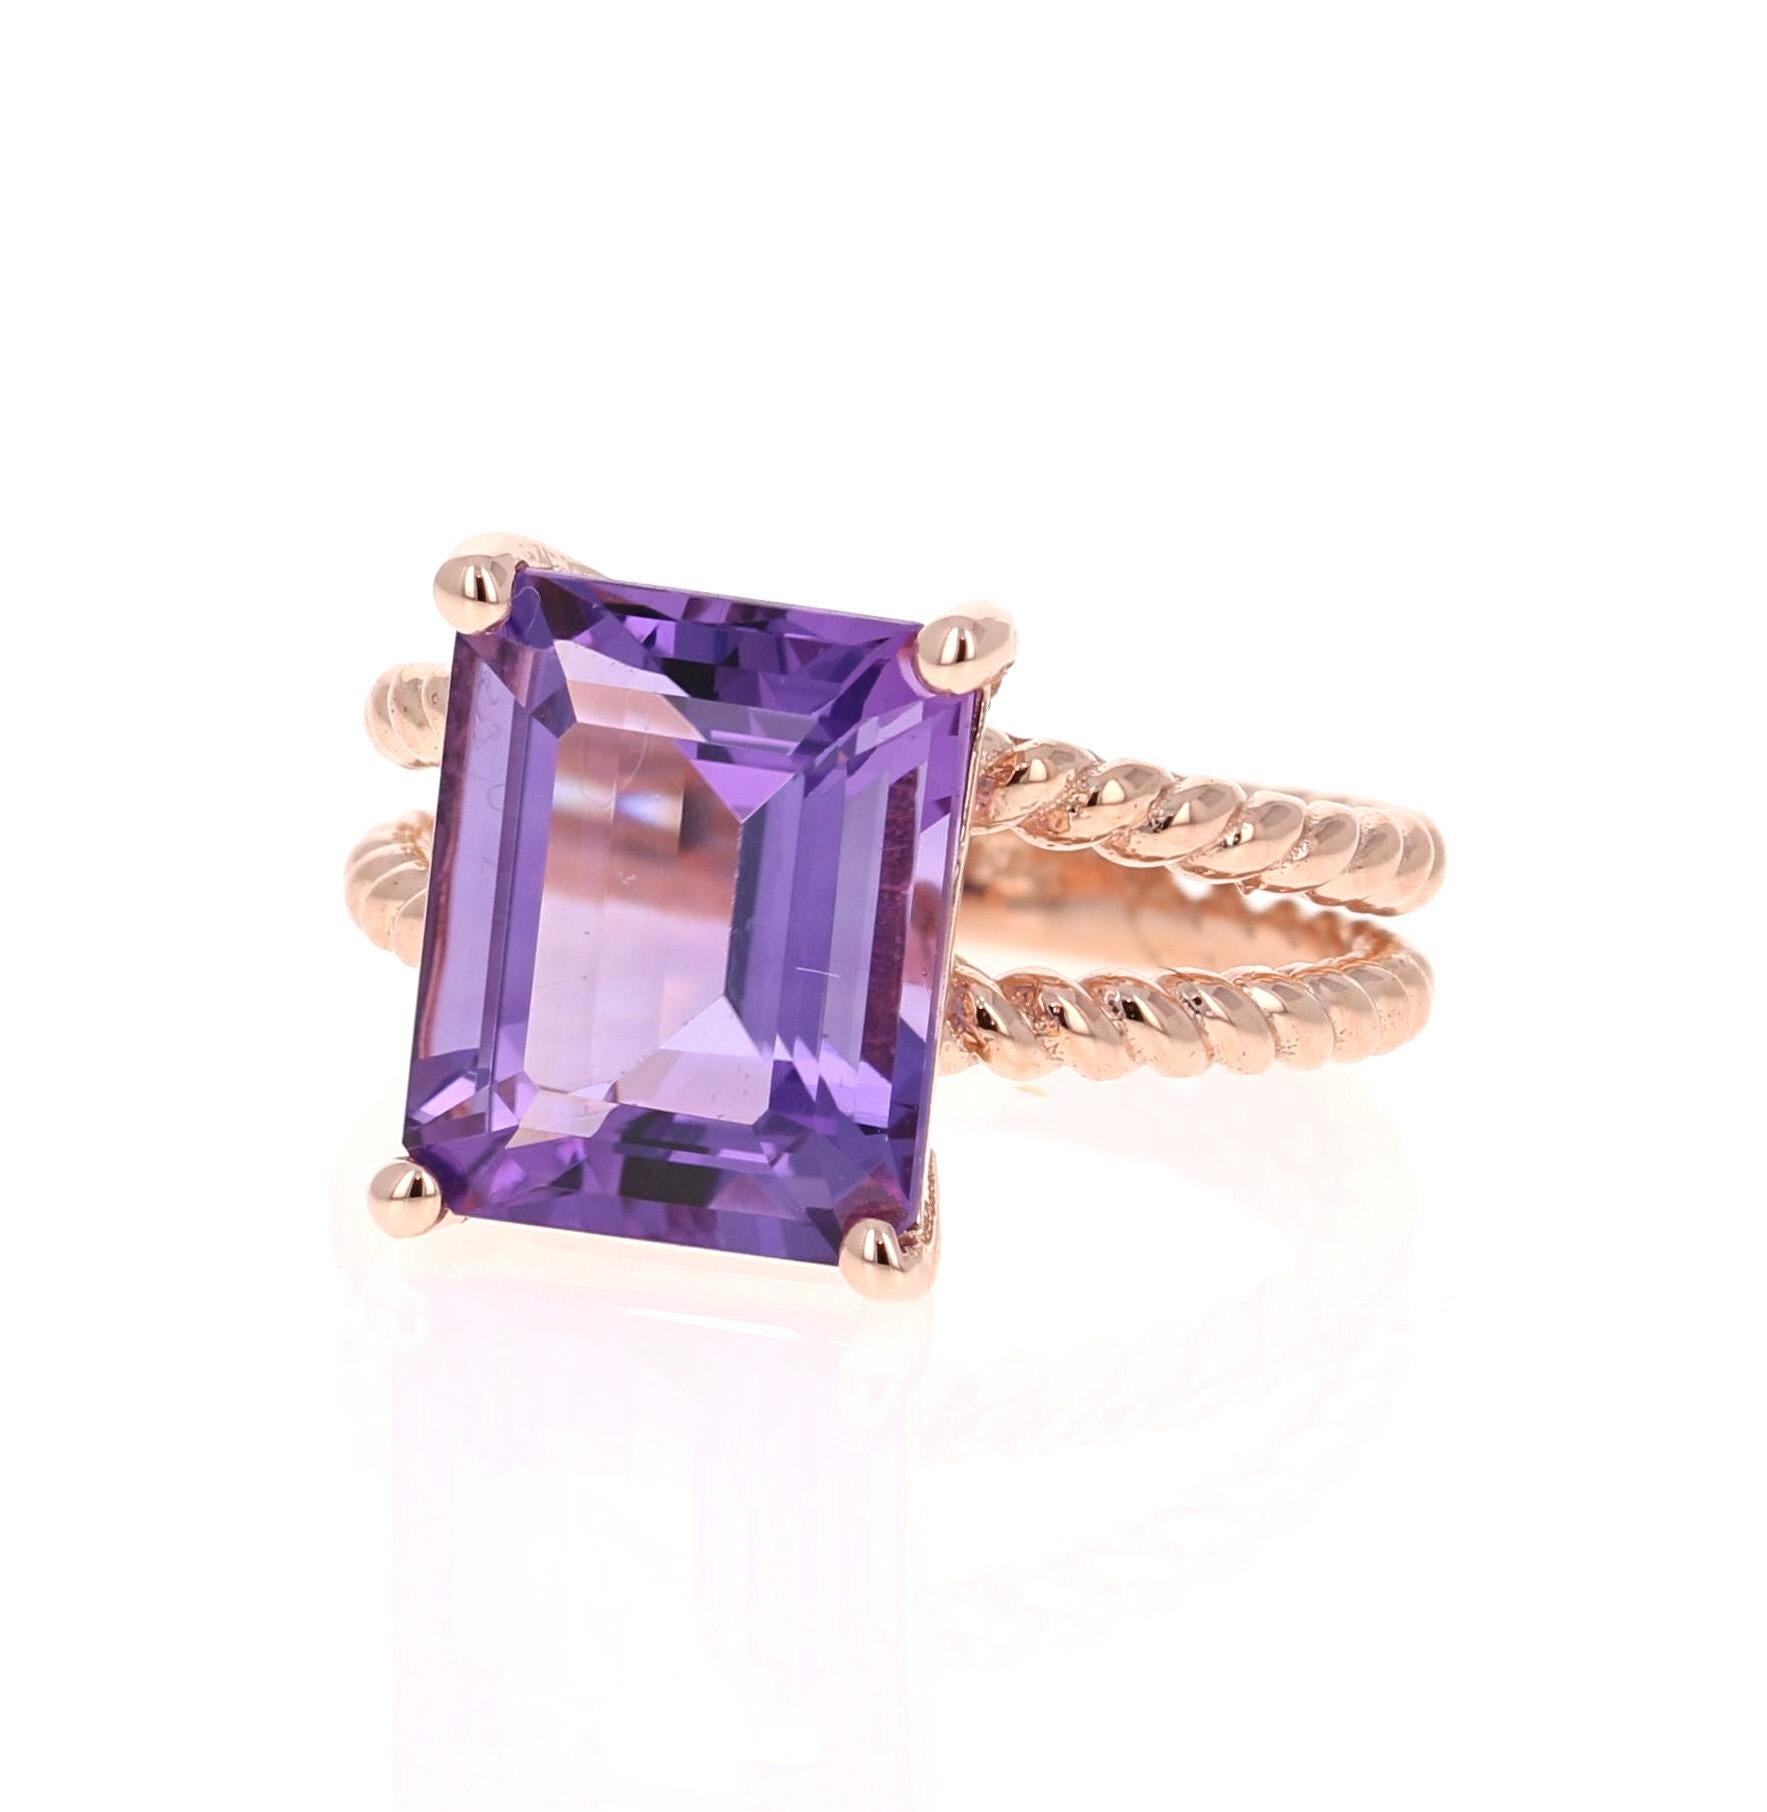 This Designer inspired ring has a bright and vivid Emerald Cut Amethyst in the center that weighs 5.51 carats. 
The setting is beautifully crafted in 14K Rose Gold and weighs approximately 5.1 grams.
The ring is a size 7 and can be re-sized if